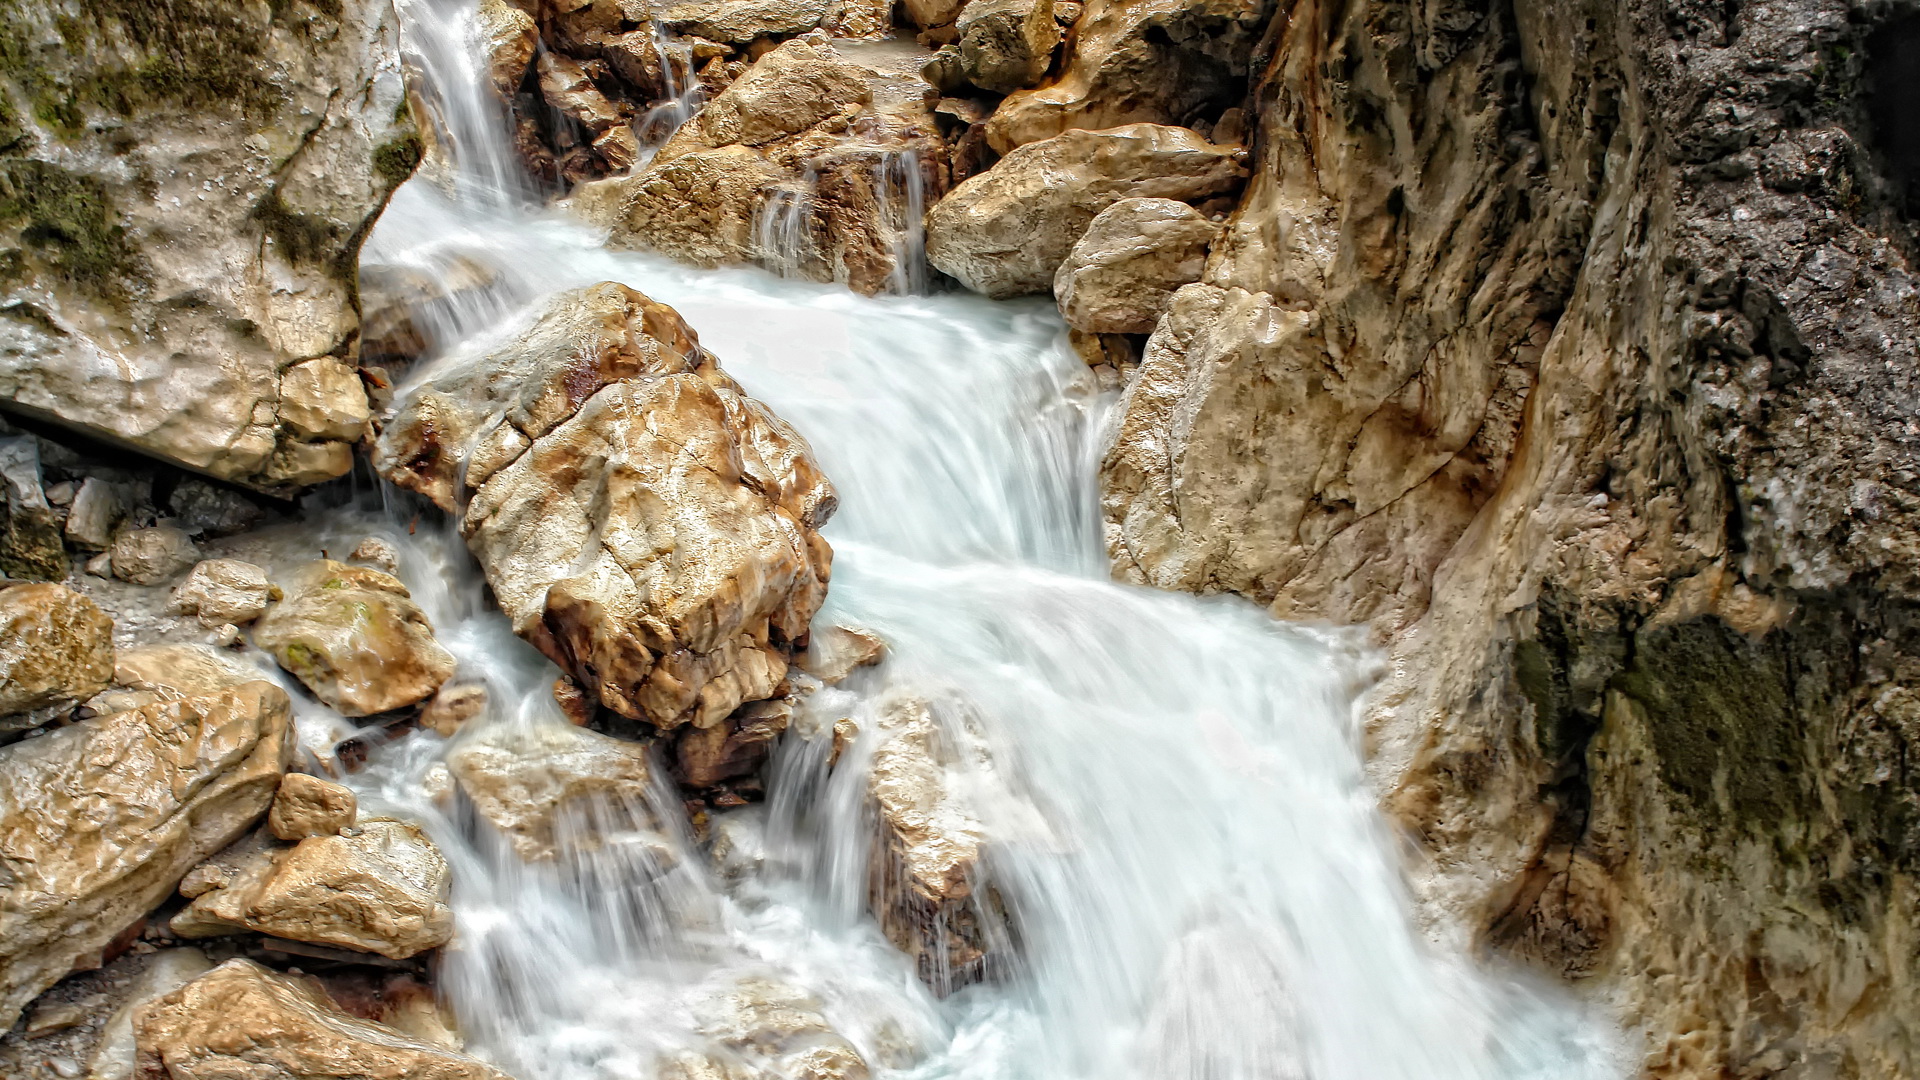 Free Download Natural Scenery Picture - The Waterfall in Rapid Flow, Yellow Stones Brushed Clean 1920X1080 free wallpaper download